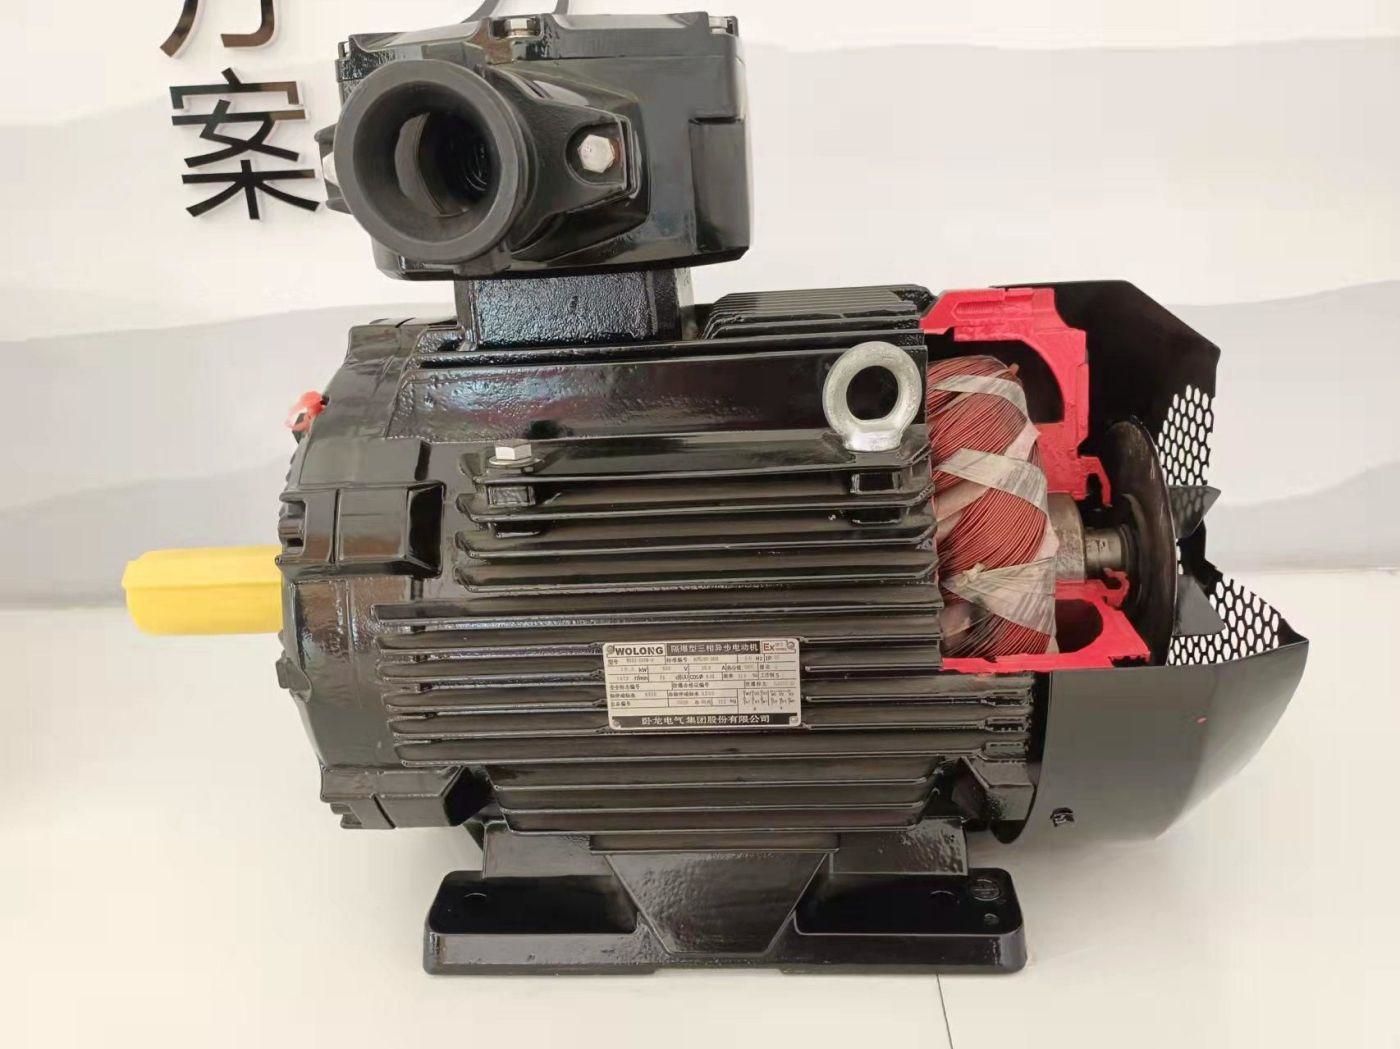 What do I need to be aware of when running an explosion-proof motor?